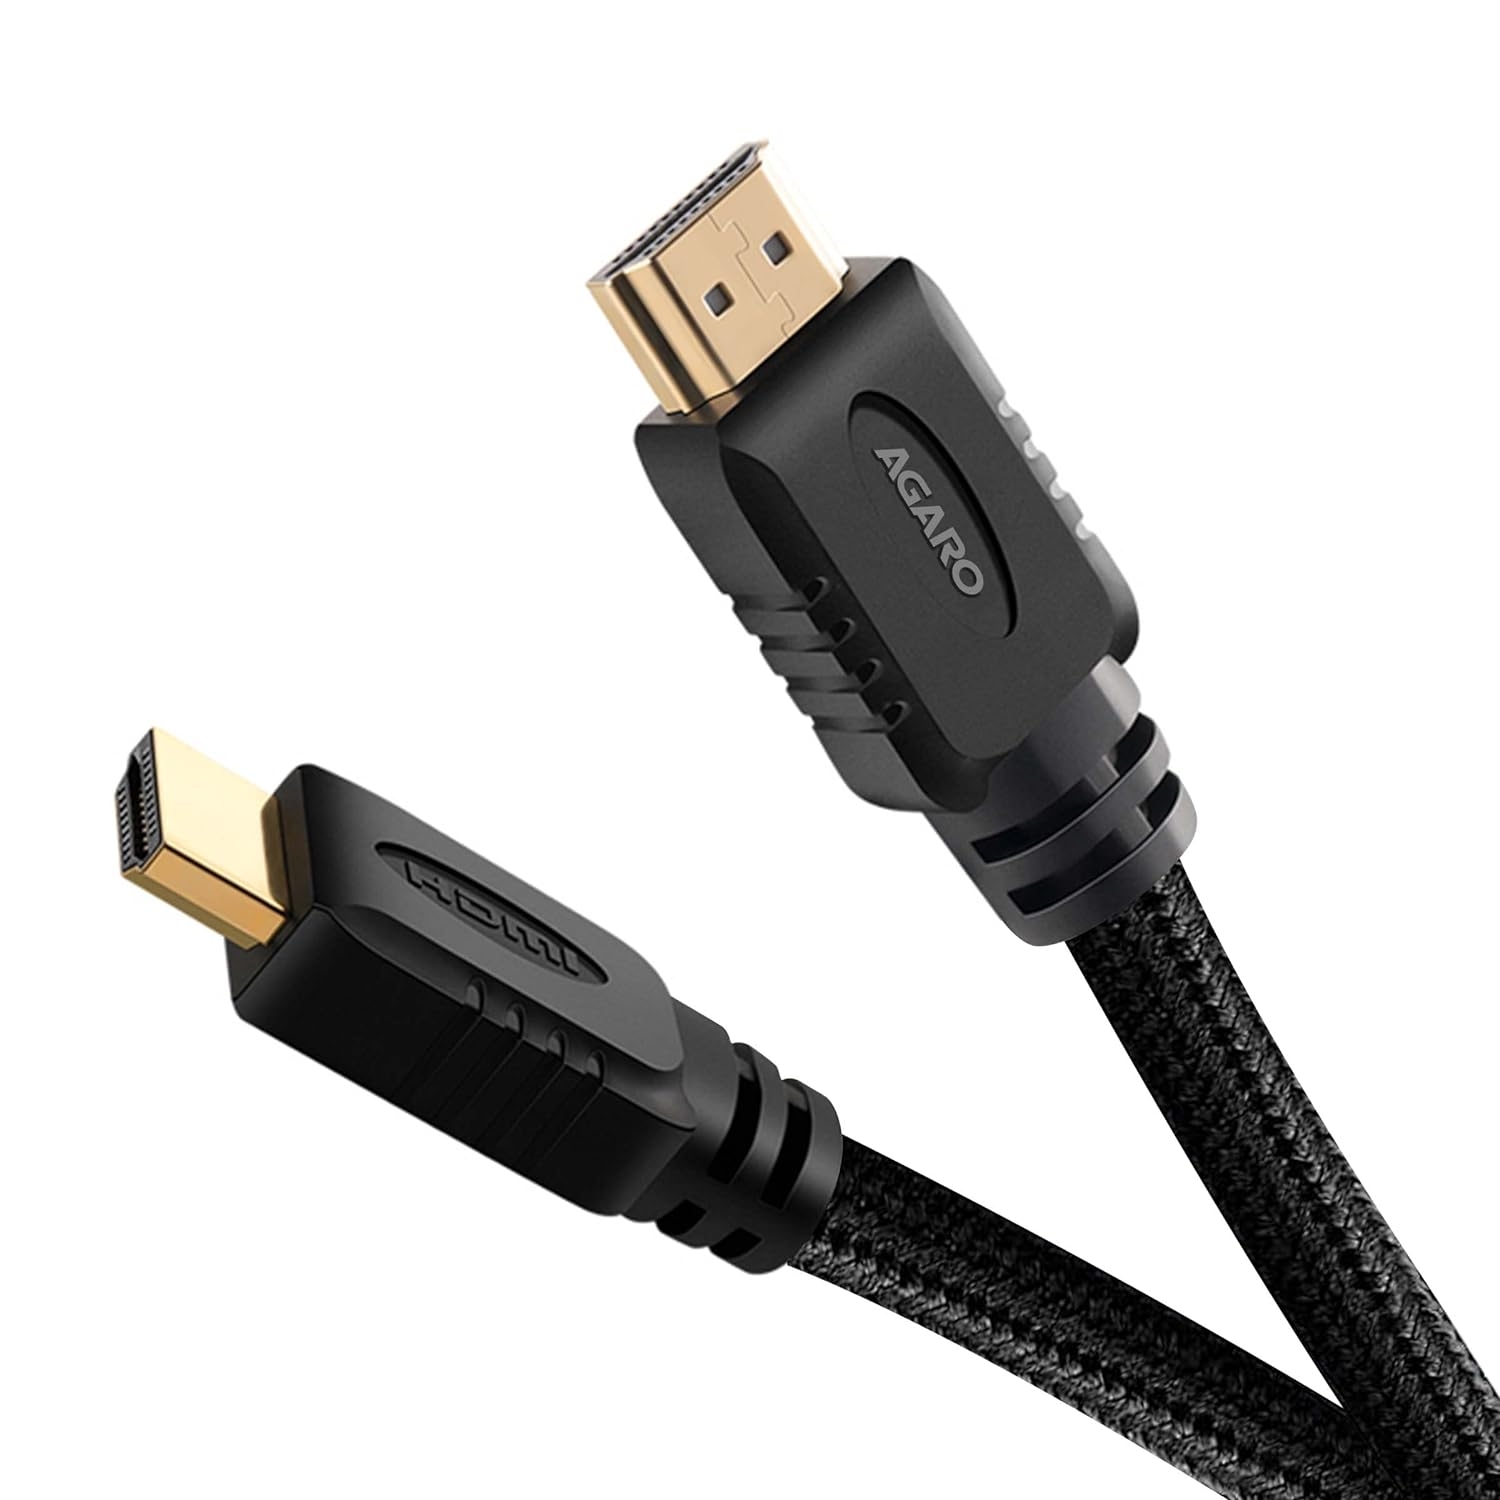 AGARO HDMI Cable 20 Meters, 18Gbps 4K@60Hz Support HDR, 3D, ARC, HDCP 2.2HDMI Cord for PS5/PS4/Xbox/Apple TV/Projector